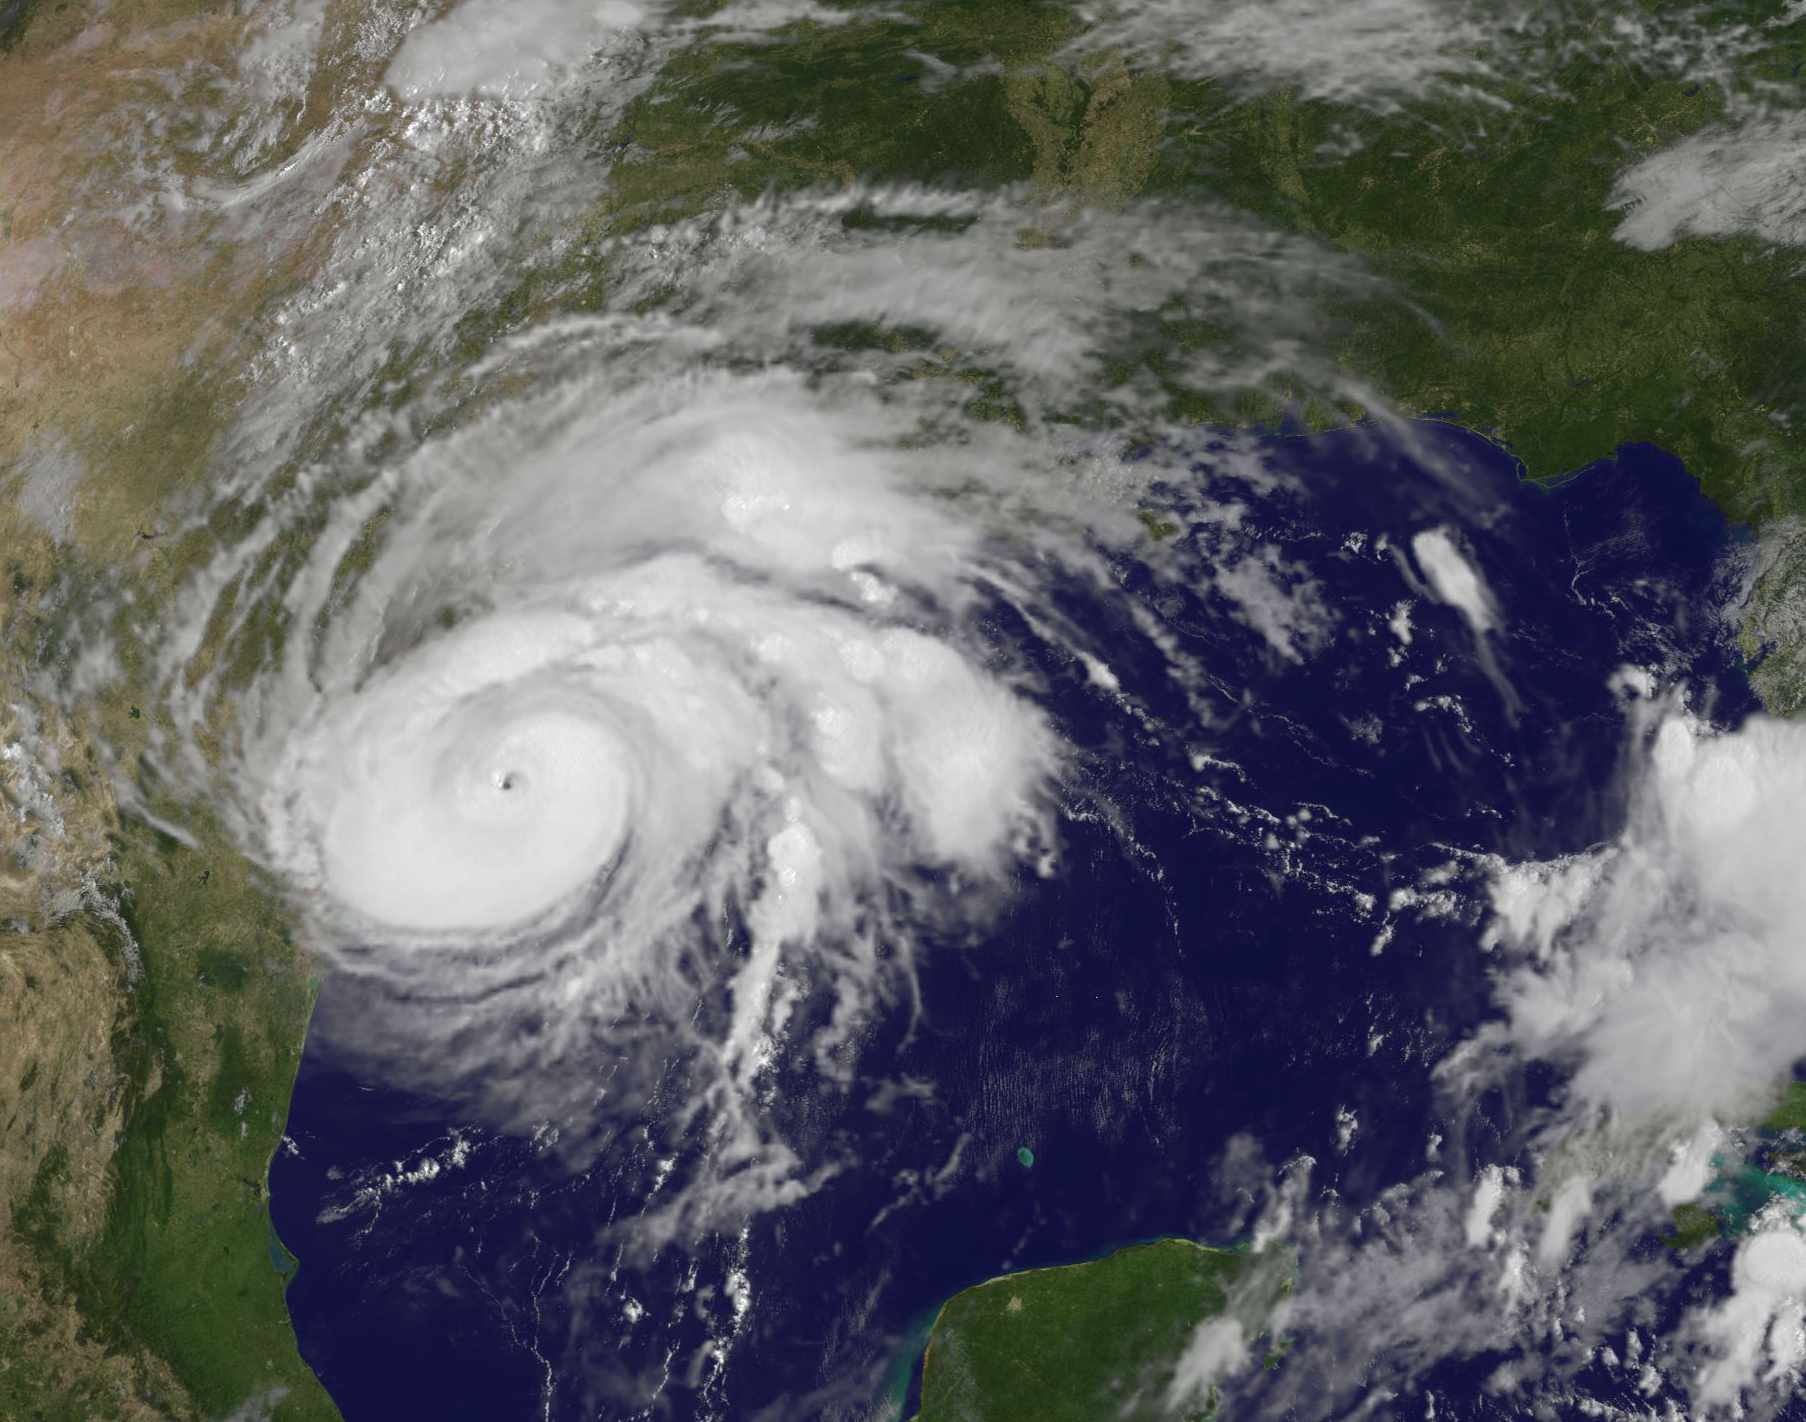 Satellite image of Harvey, a swirling cloud mass over the coast of eastern Texas.